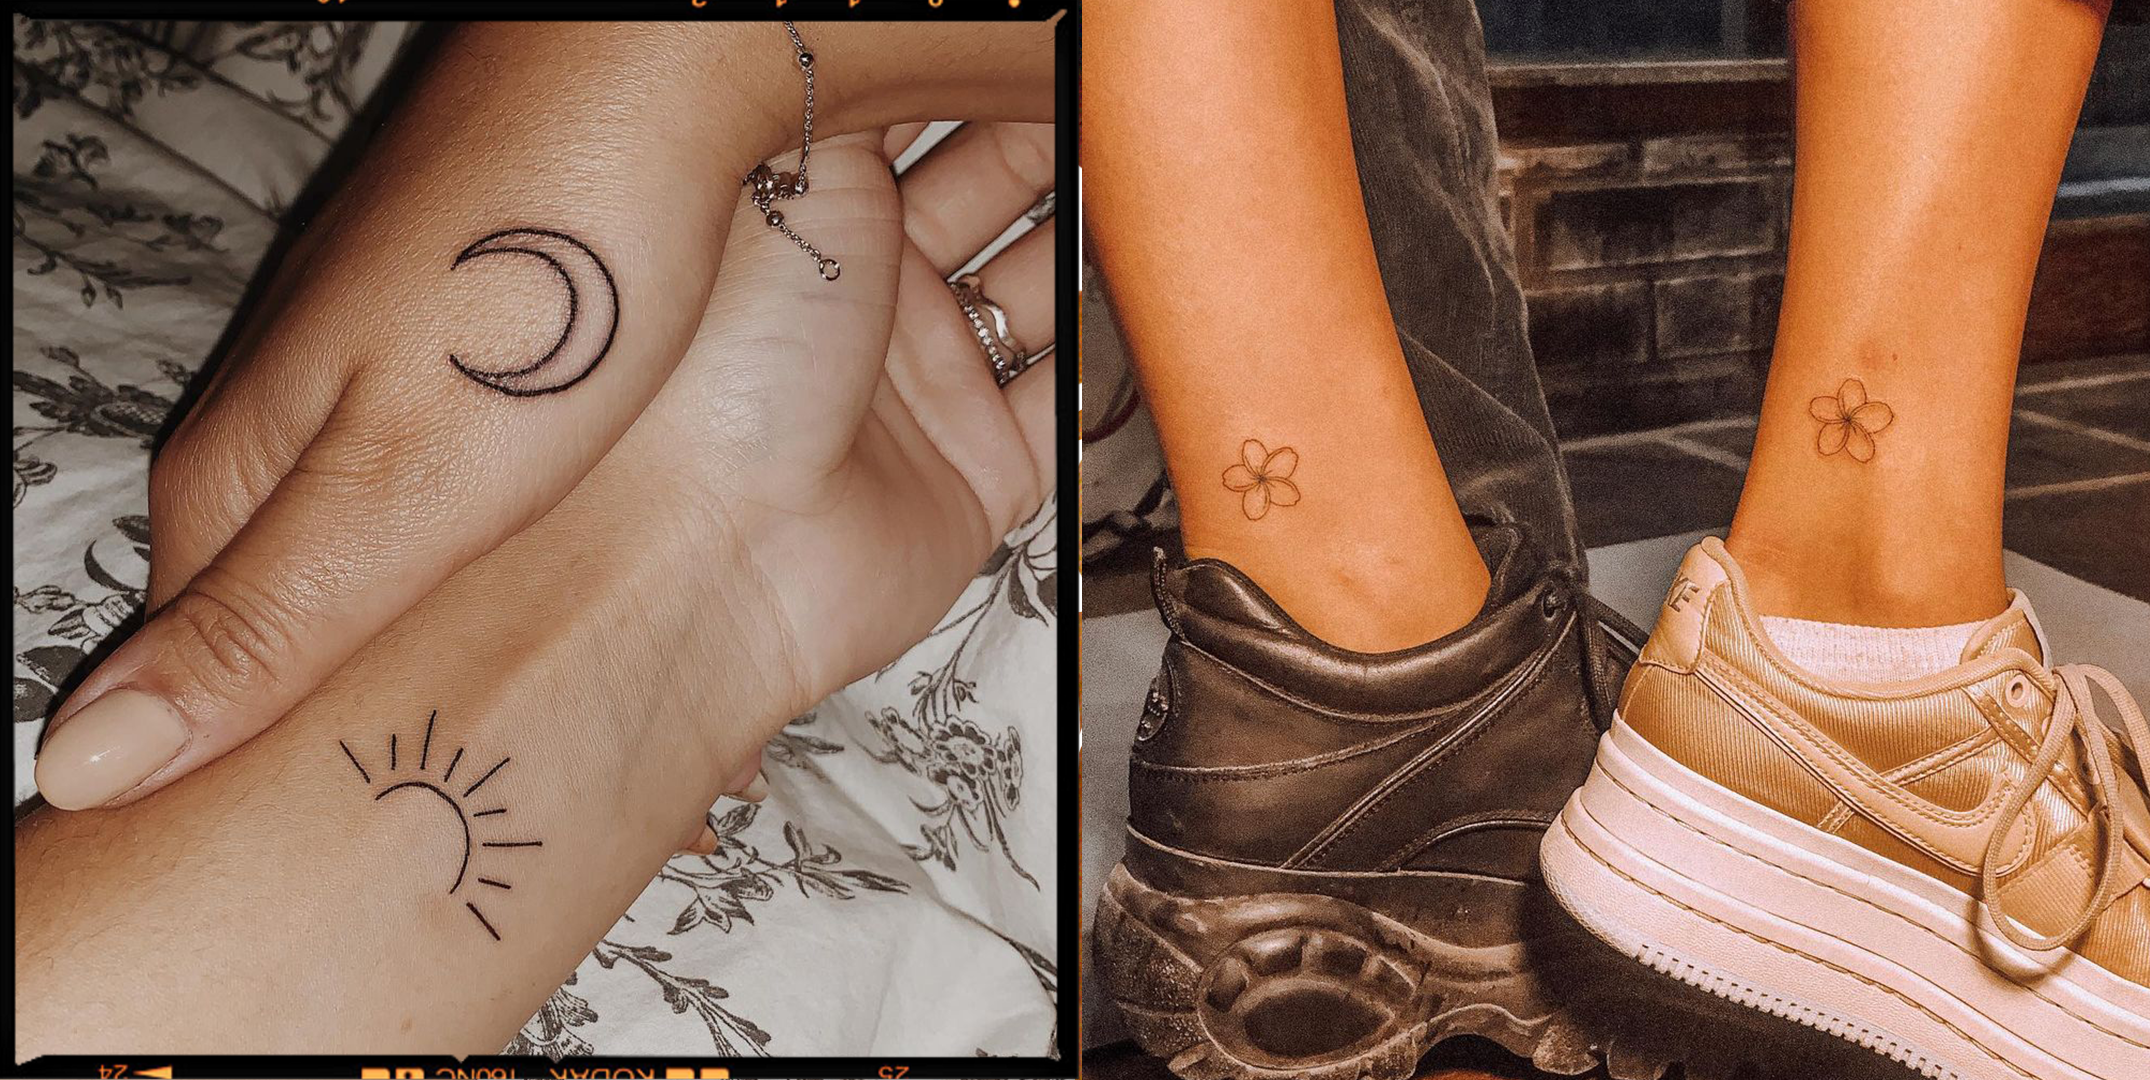 Temporary Tattoos Sexy Elf For Women Men Realistic Indian Sun Star Moon  Dragon Flower Tattoo Sticker Foot Arm Small Tatoos Paste 231018 From  Guan06, $6.67 | DHgate.Com